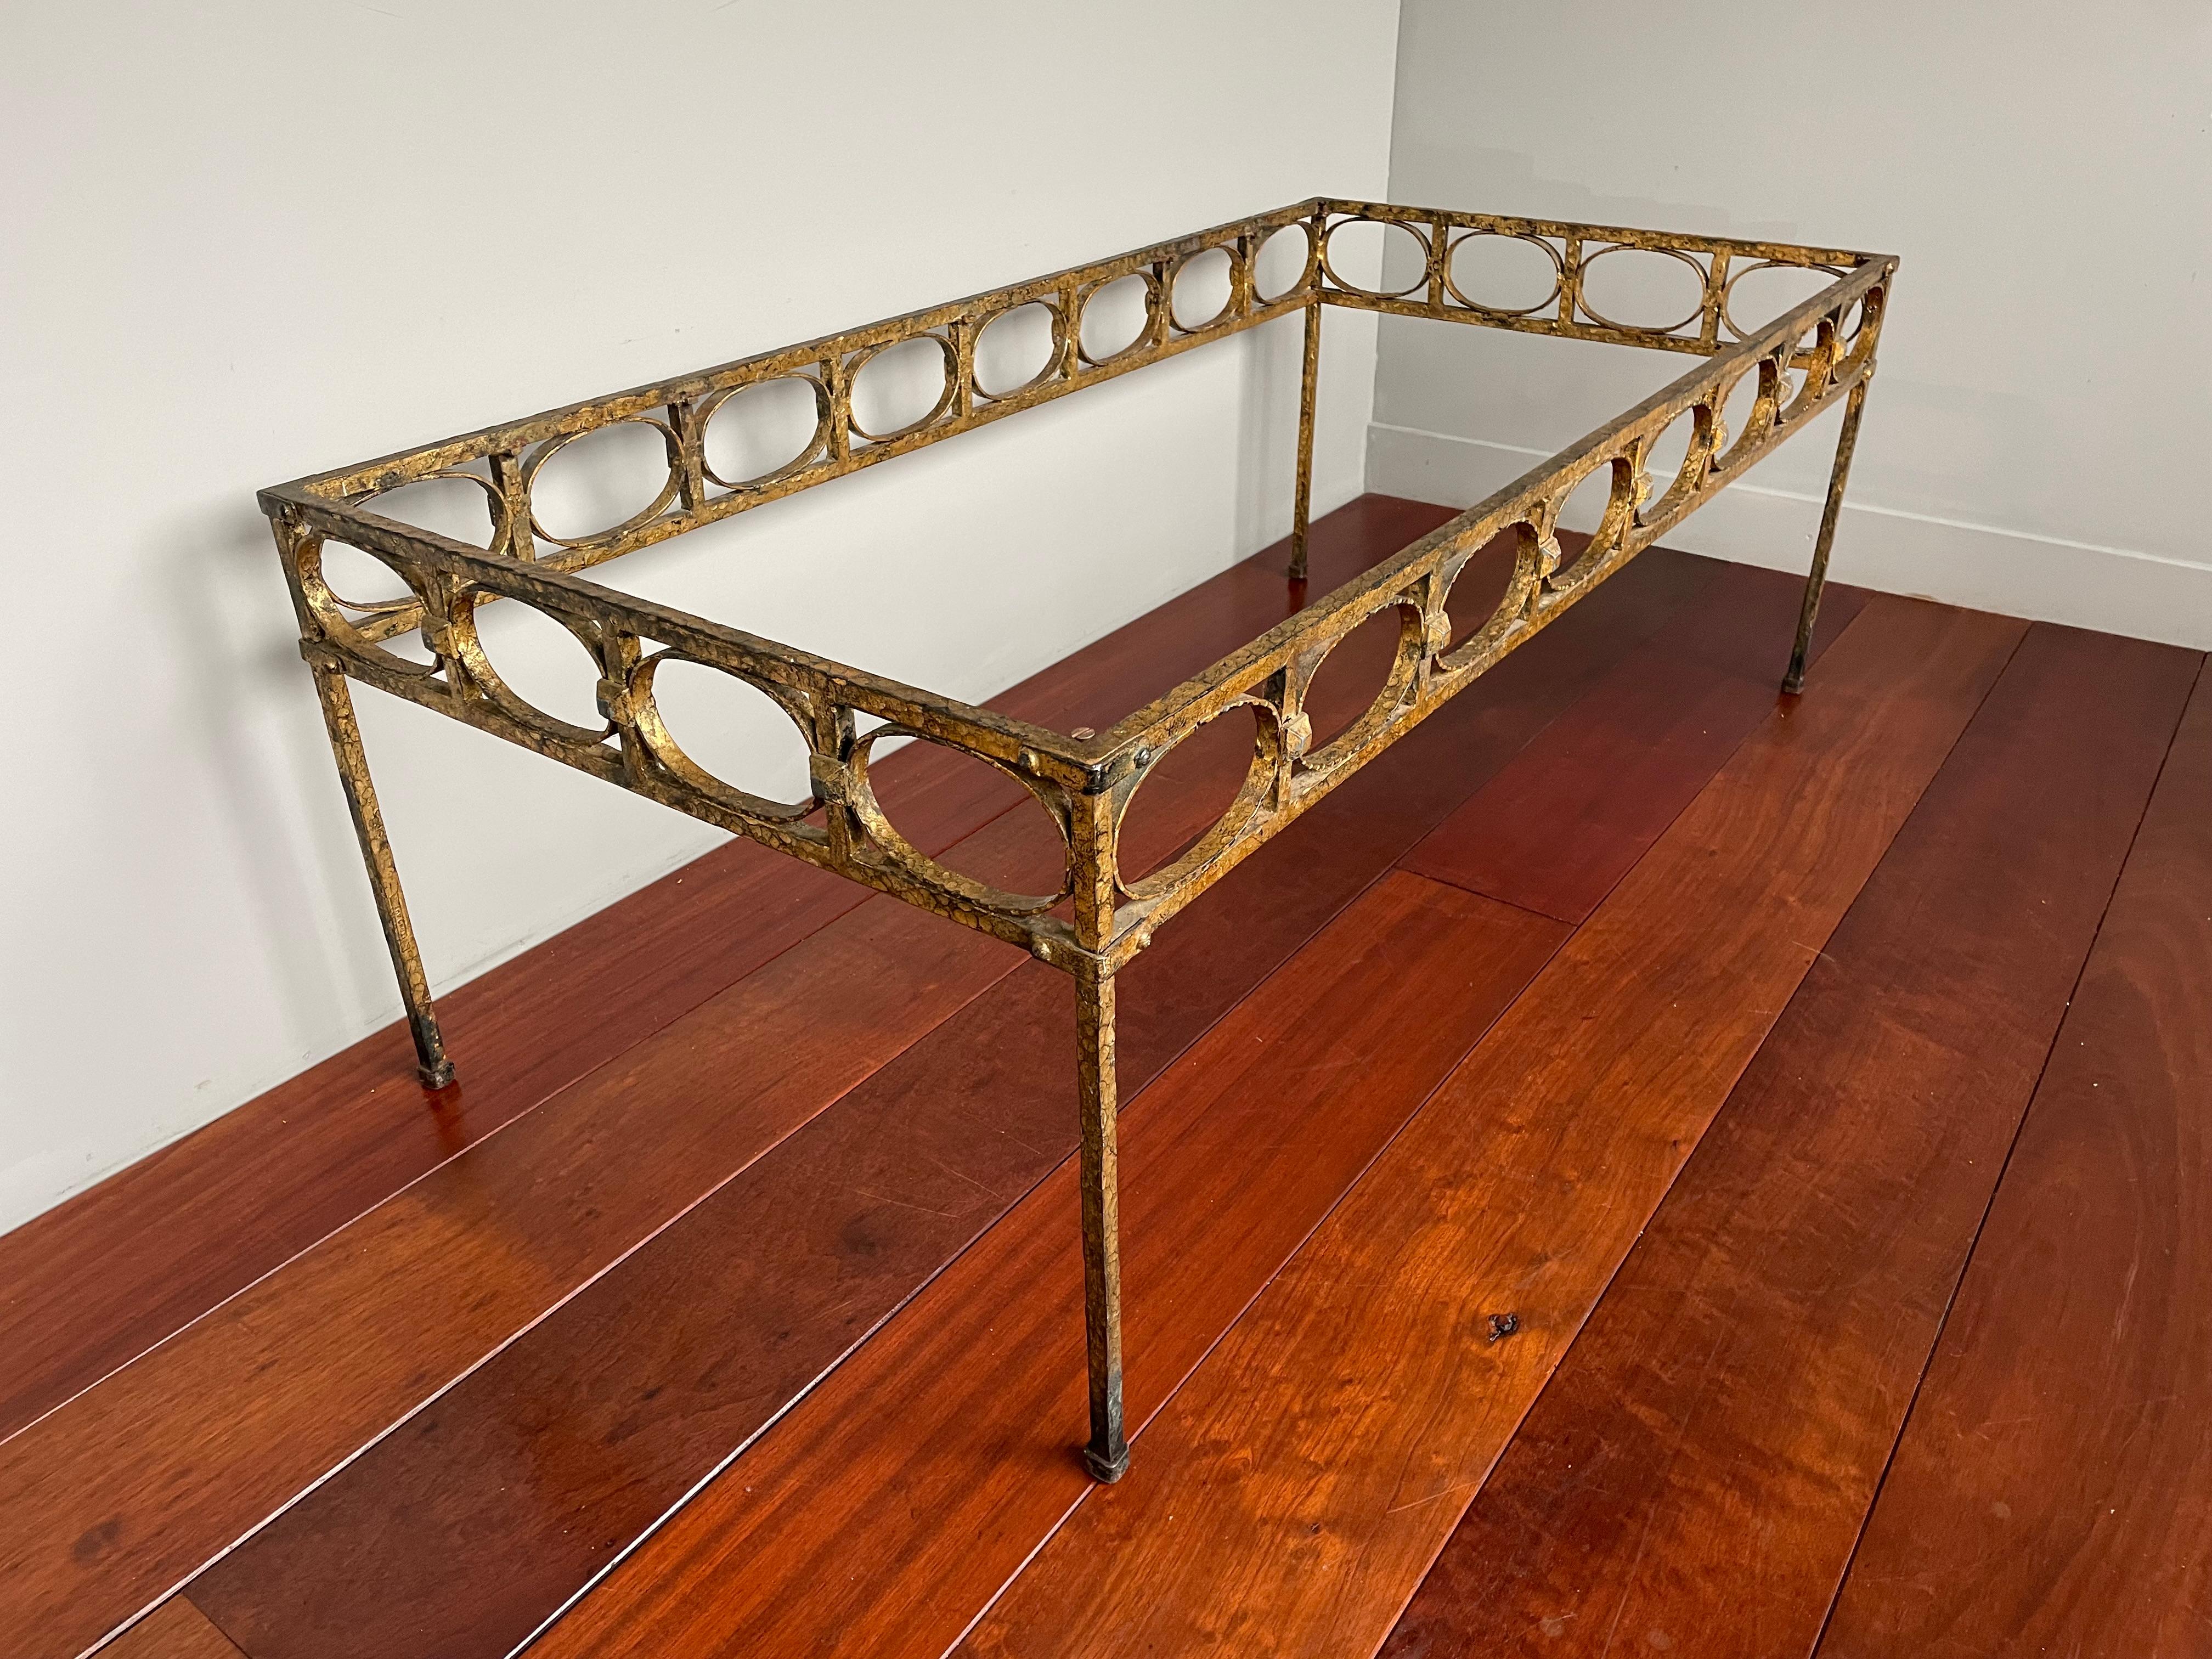 Stunning Midcentury Modern Gilt Wrought Iron Coffee Table Base by Ferro Art 1950 In Excellent Condition For Sale In Lisse, NL